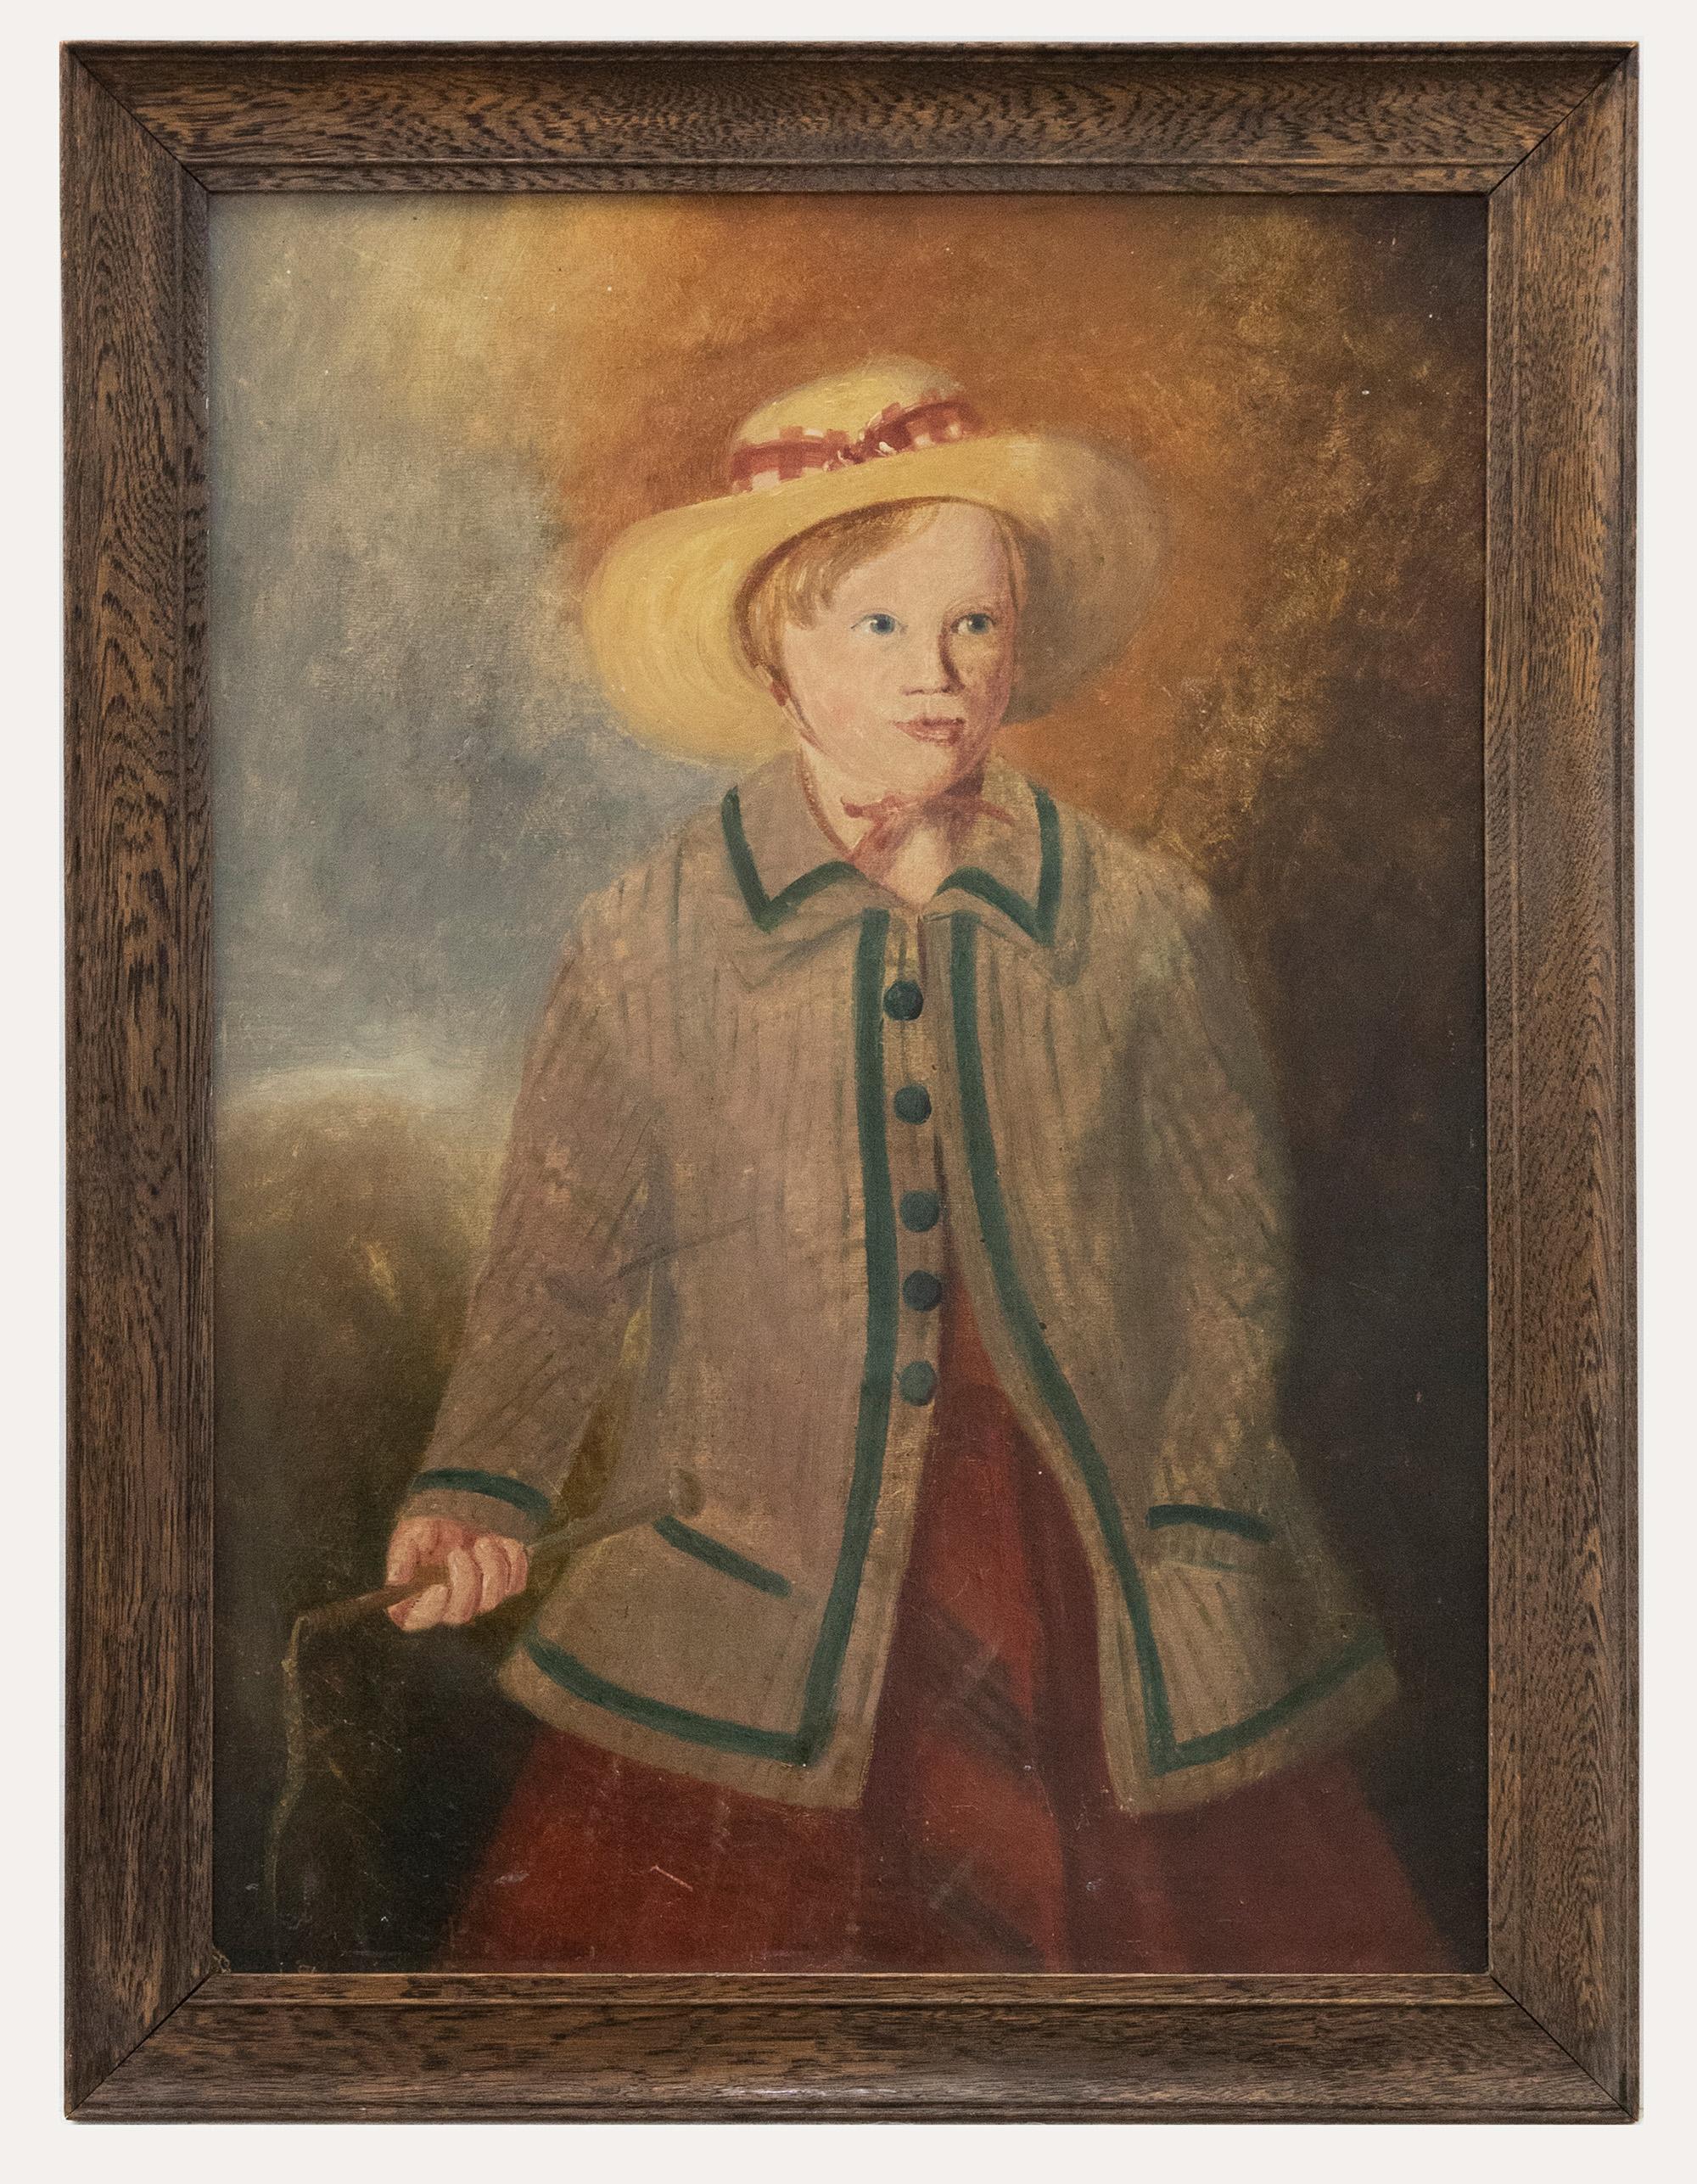 Unknown Figurative Painting - Spackman - 19th Century Folk Art Oil, Child in a Button Down Coat